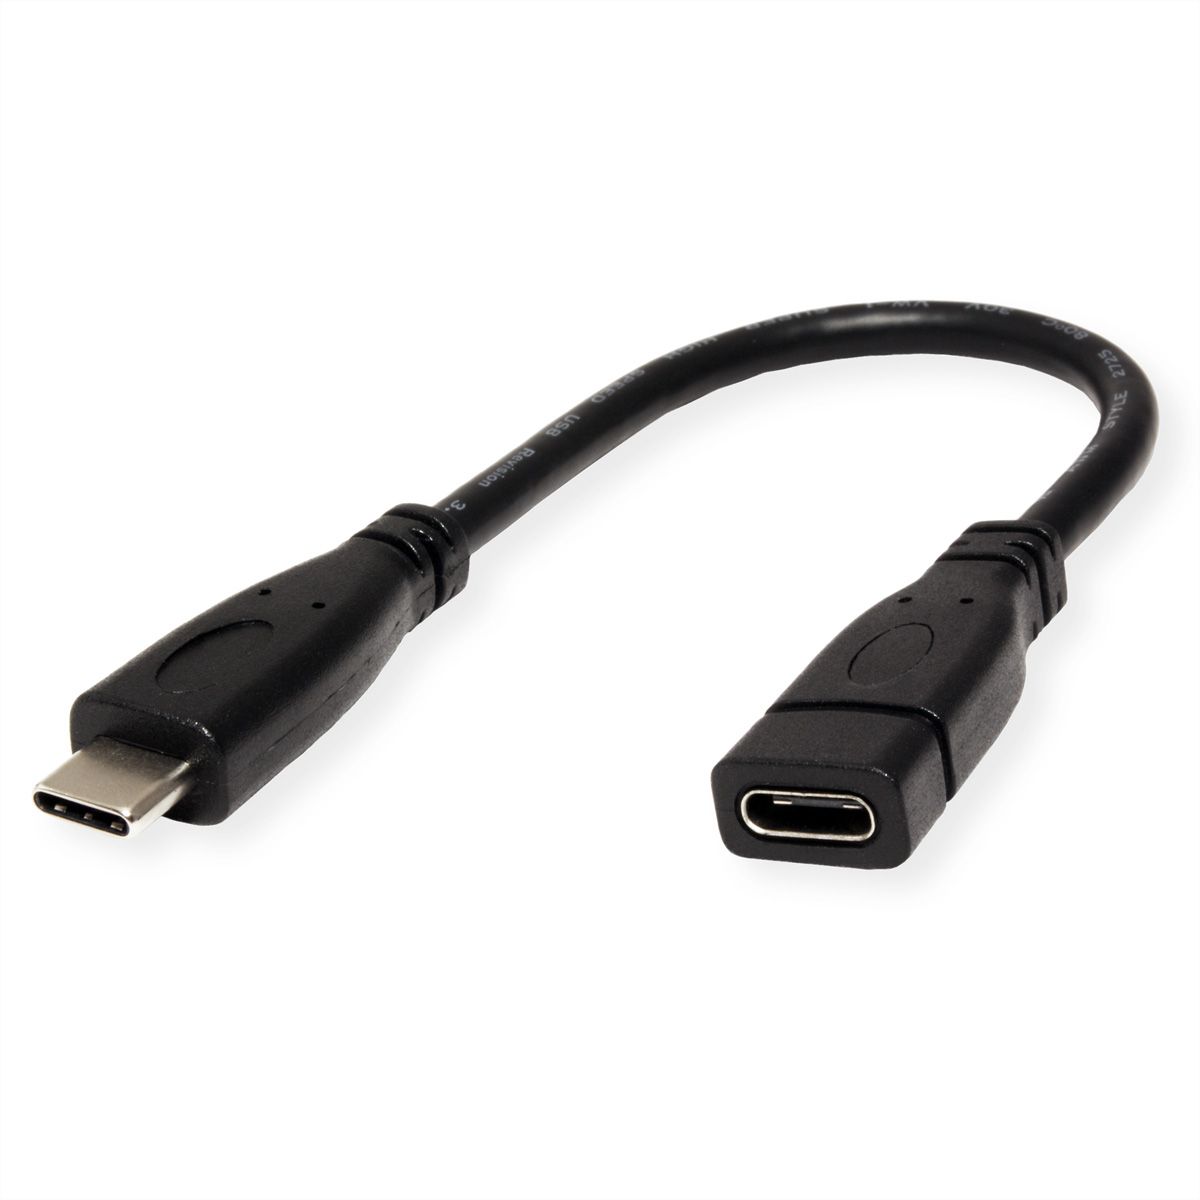 150cm Cablecc 50-200cm 10Gbps USB-C USB 3.1 Type C Gen2 Male to Male Data 100W Cable with E-Marker 